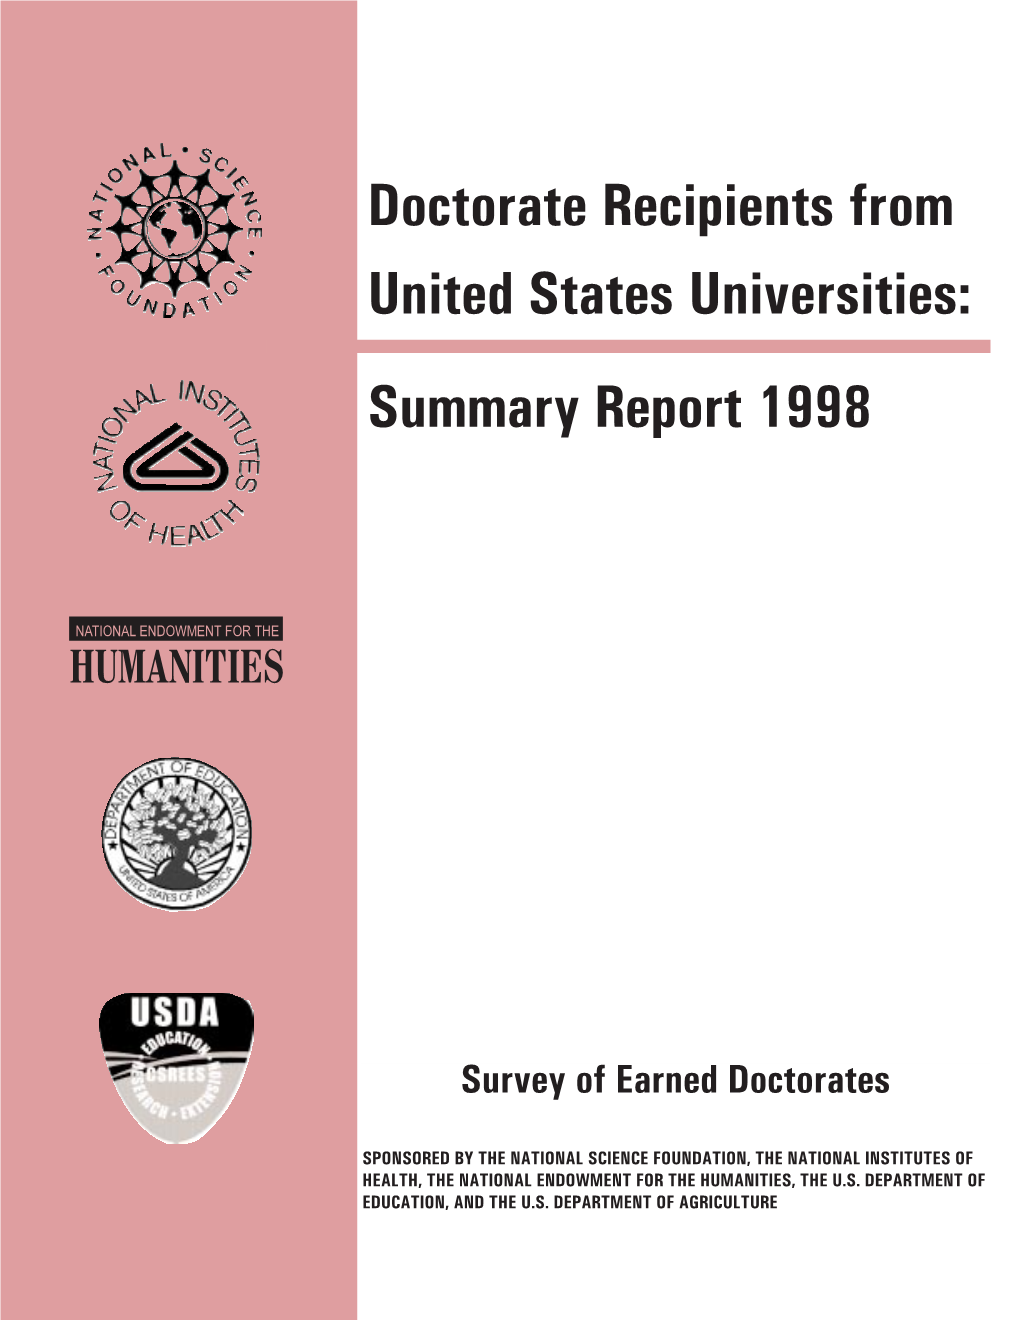 Doctorate Recipients from United States Universities: Summary Report 1998